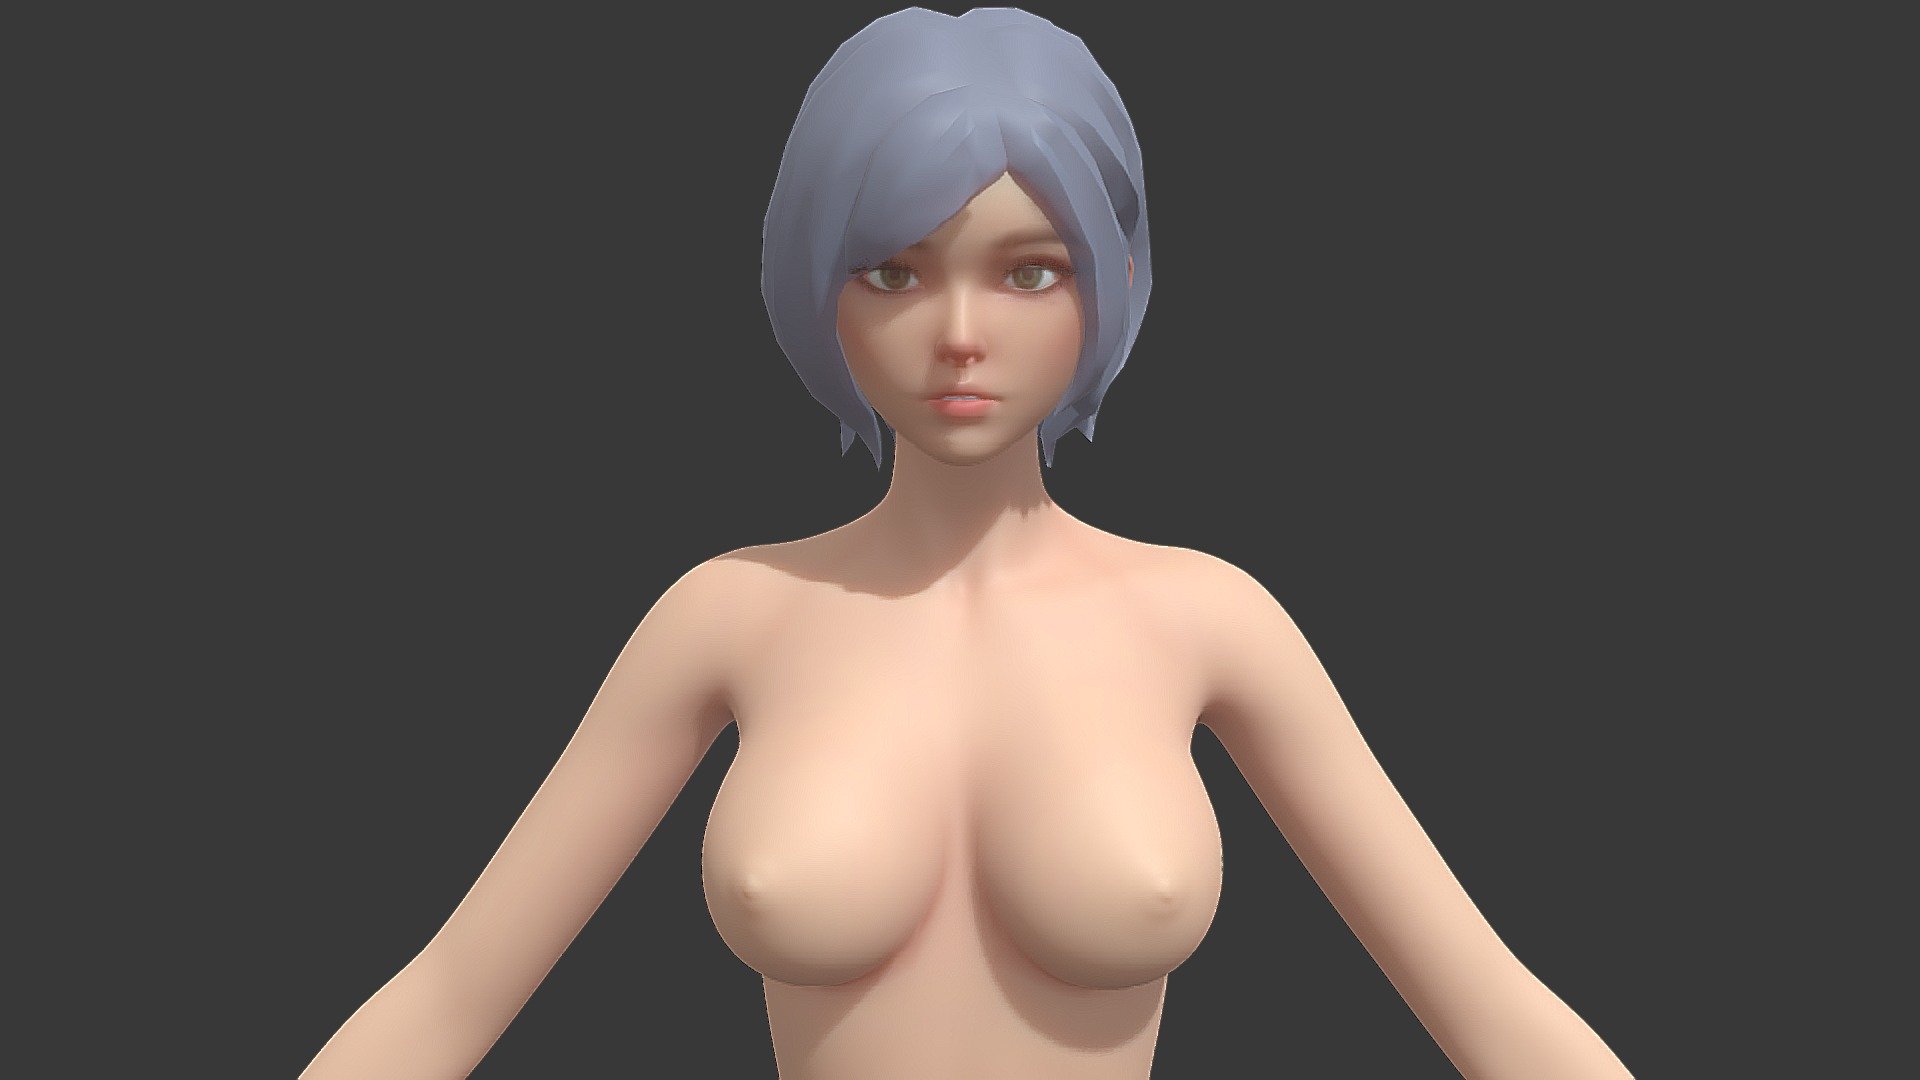 using what i have learned in the last few months i decided to make this girl 3d model